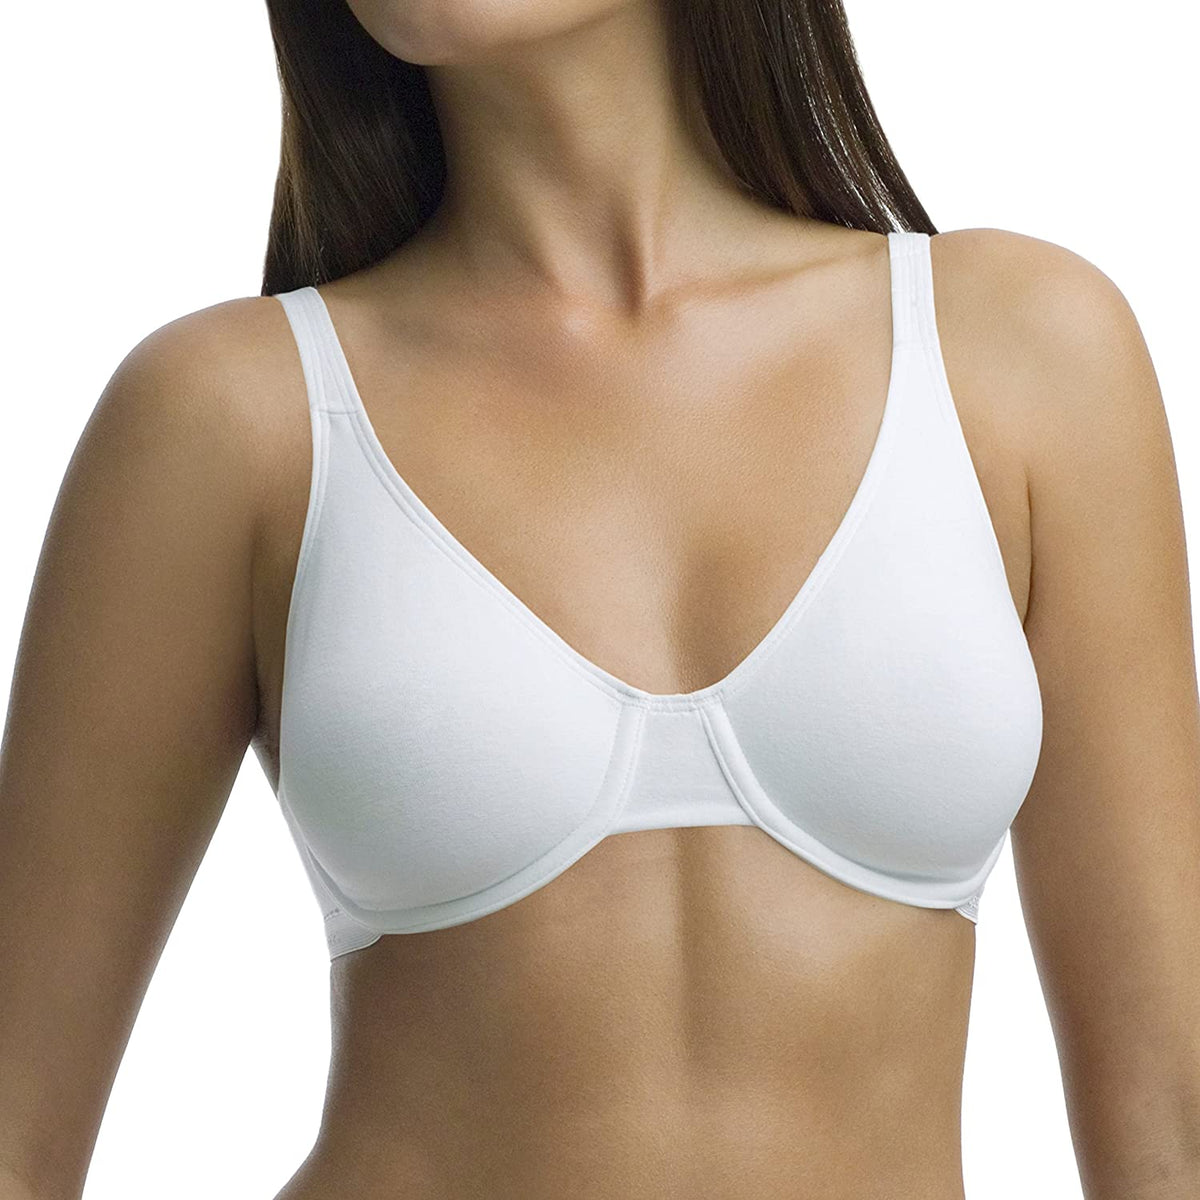 New Fruit of the Loom Womens Cotton Stretch Extreme Comfort Bra, White, Sz  40C!